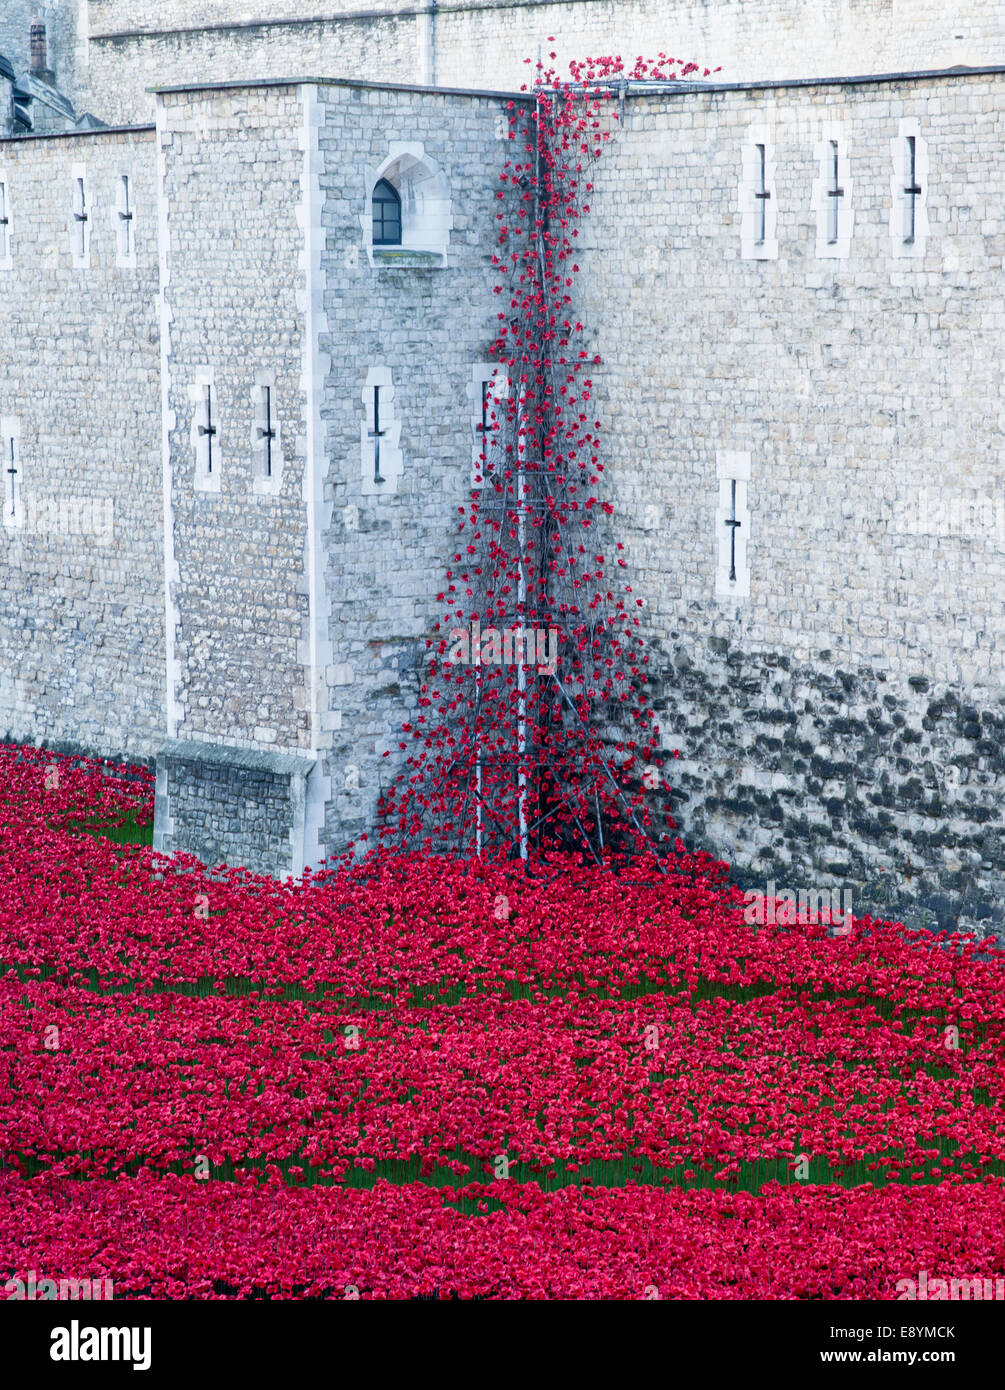 October 2014: 'Blood Swept Lands and Seas of Red' by Paul Cummings. Red poppies bleed into the moat at the Tower of London. Stock Photo